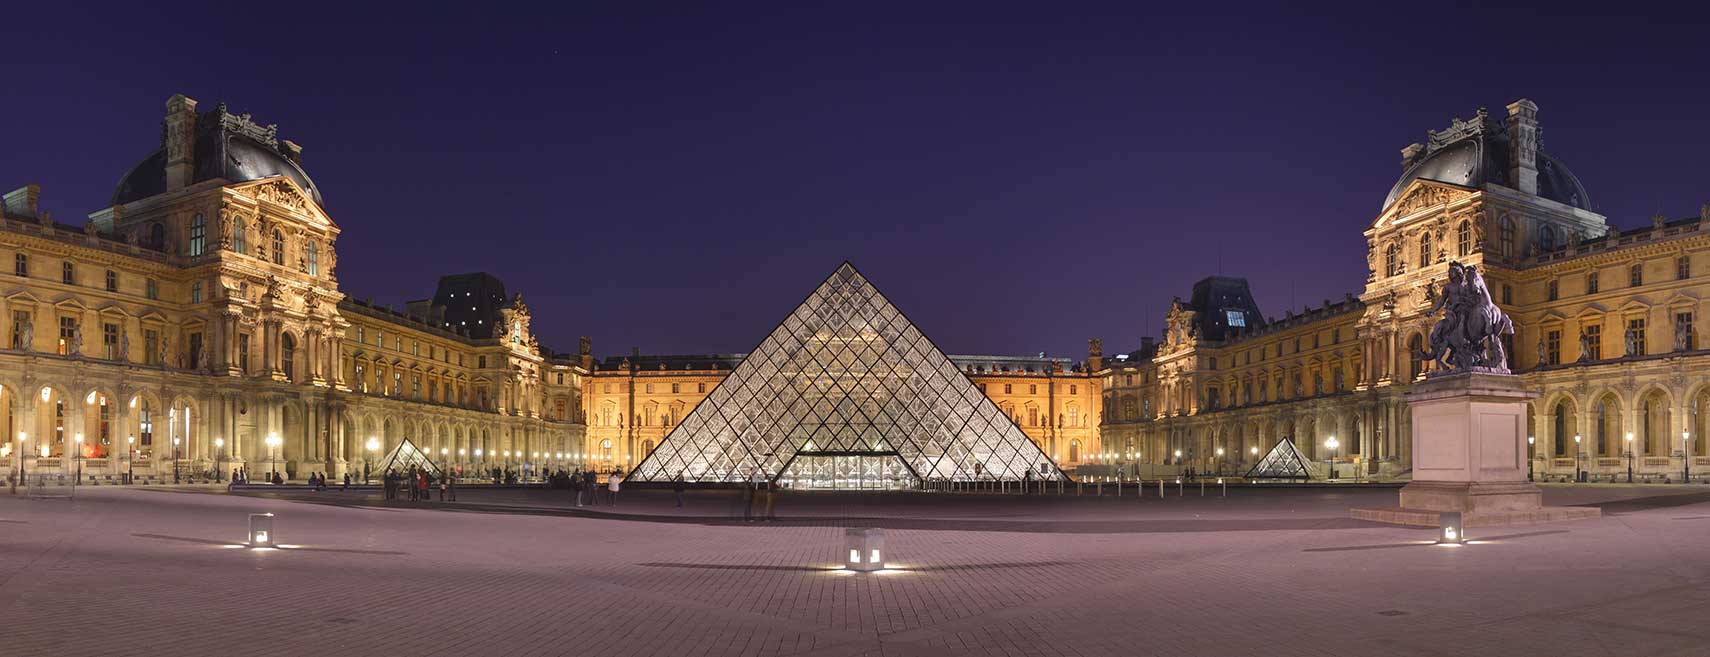 Courtyard of the Louvre Museum with glass pyramid, Paris, France